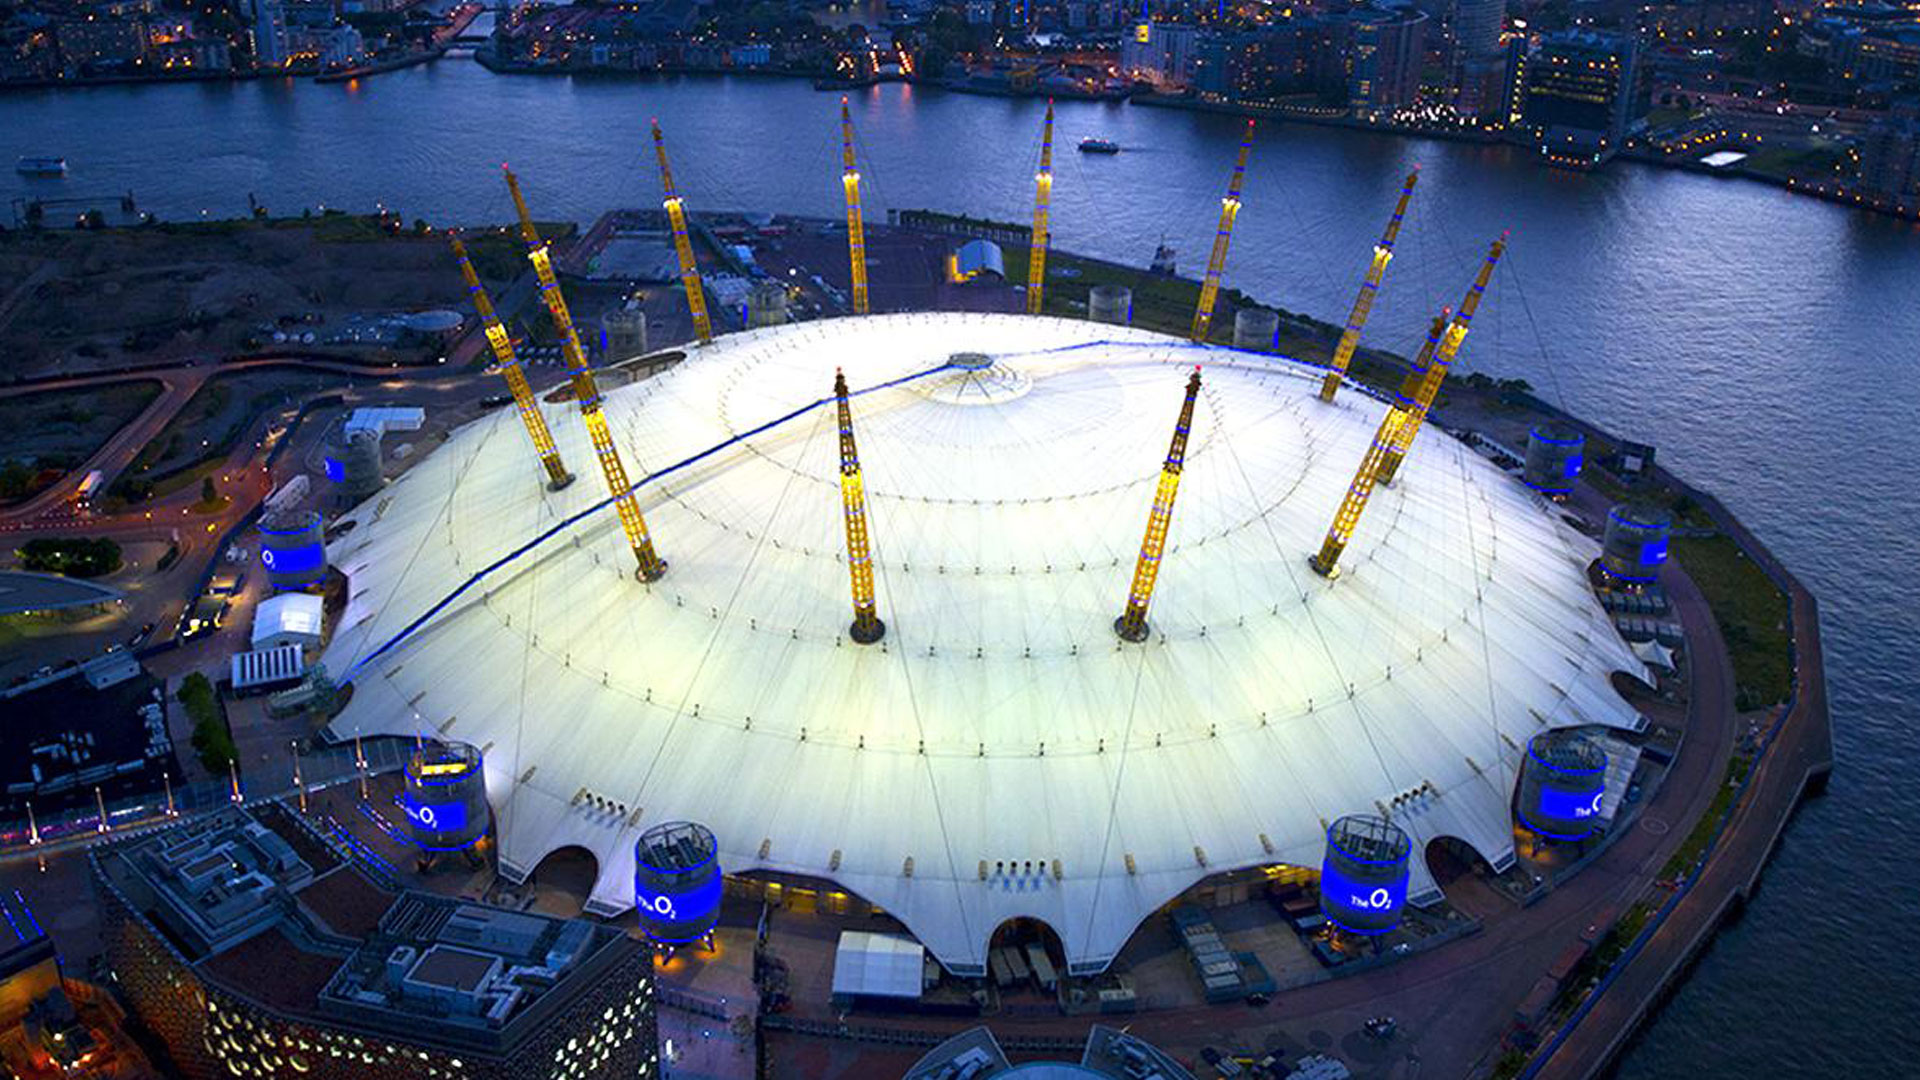 Immotion to Install VR Pods at The O2 Arena